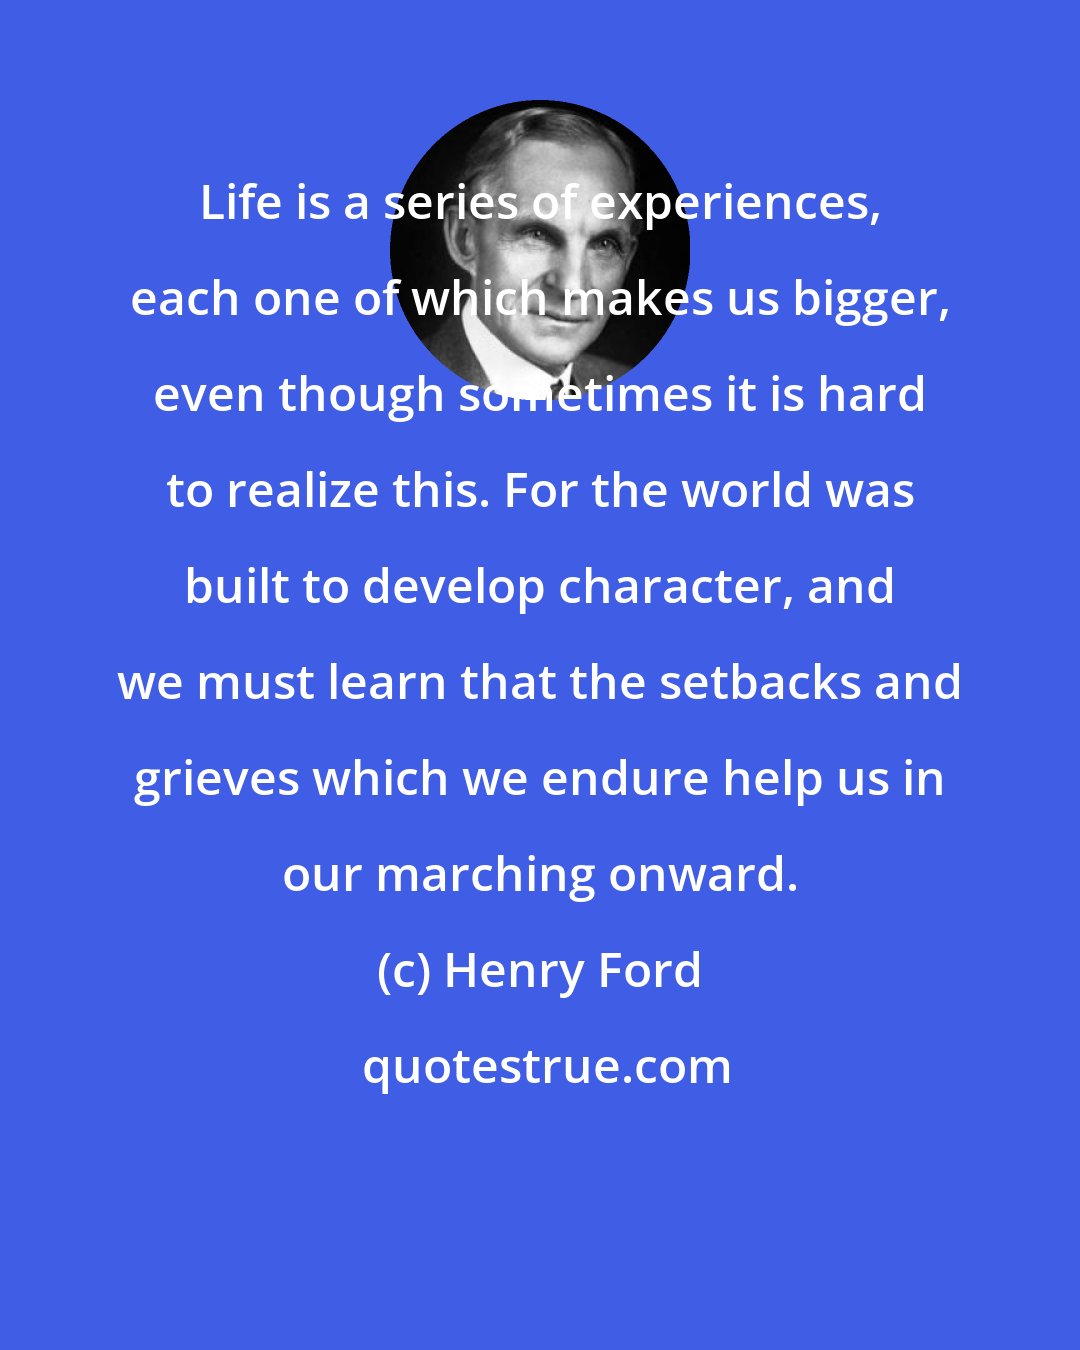 Henry Ford: Life is a series of experiences, each one of which makes us bigger, even though sometimes it is hard to realize this. For the world was built to develop character, and we must learn that the setbacks and grieves which we endure help us in our marching onward.